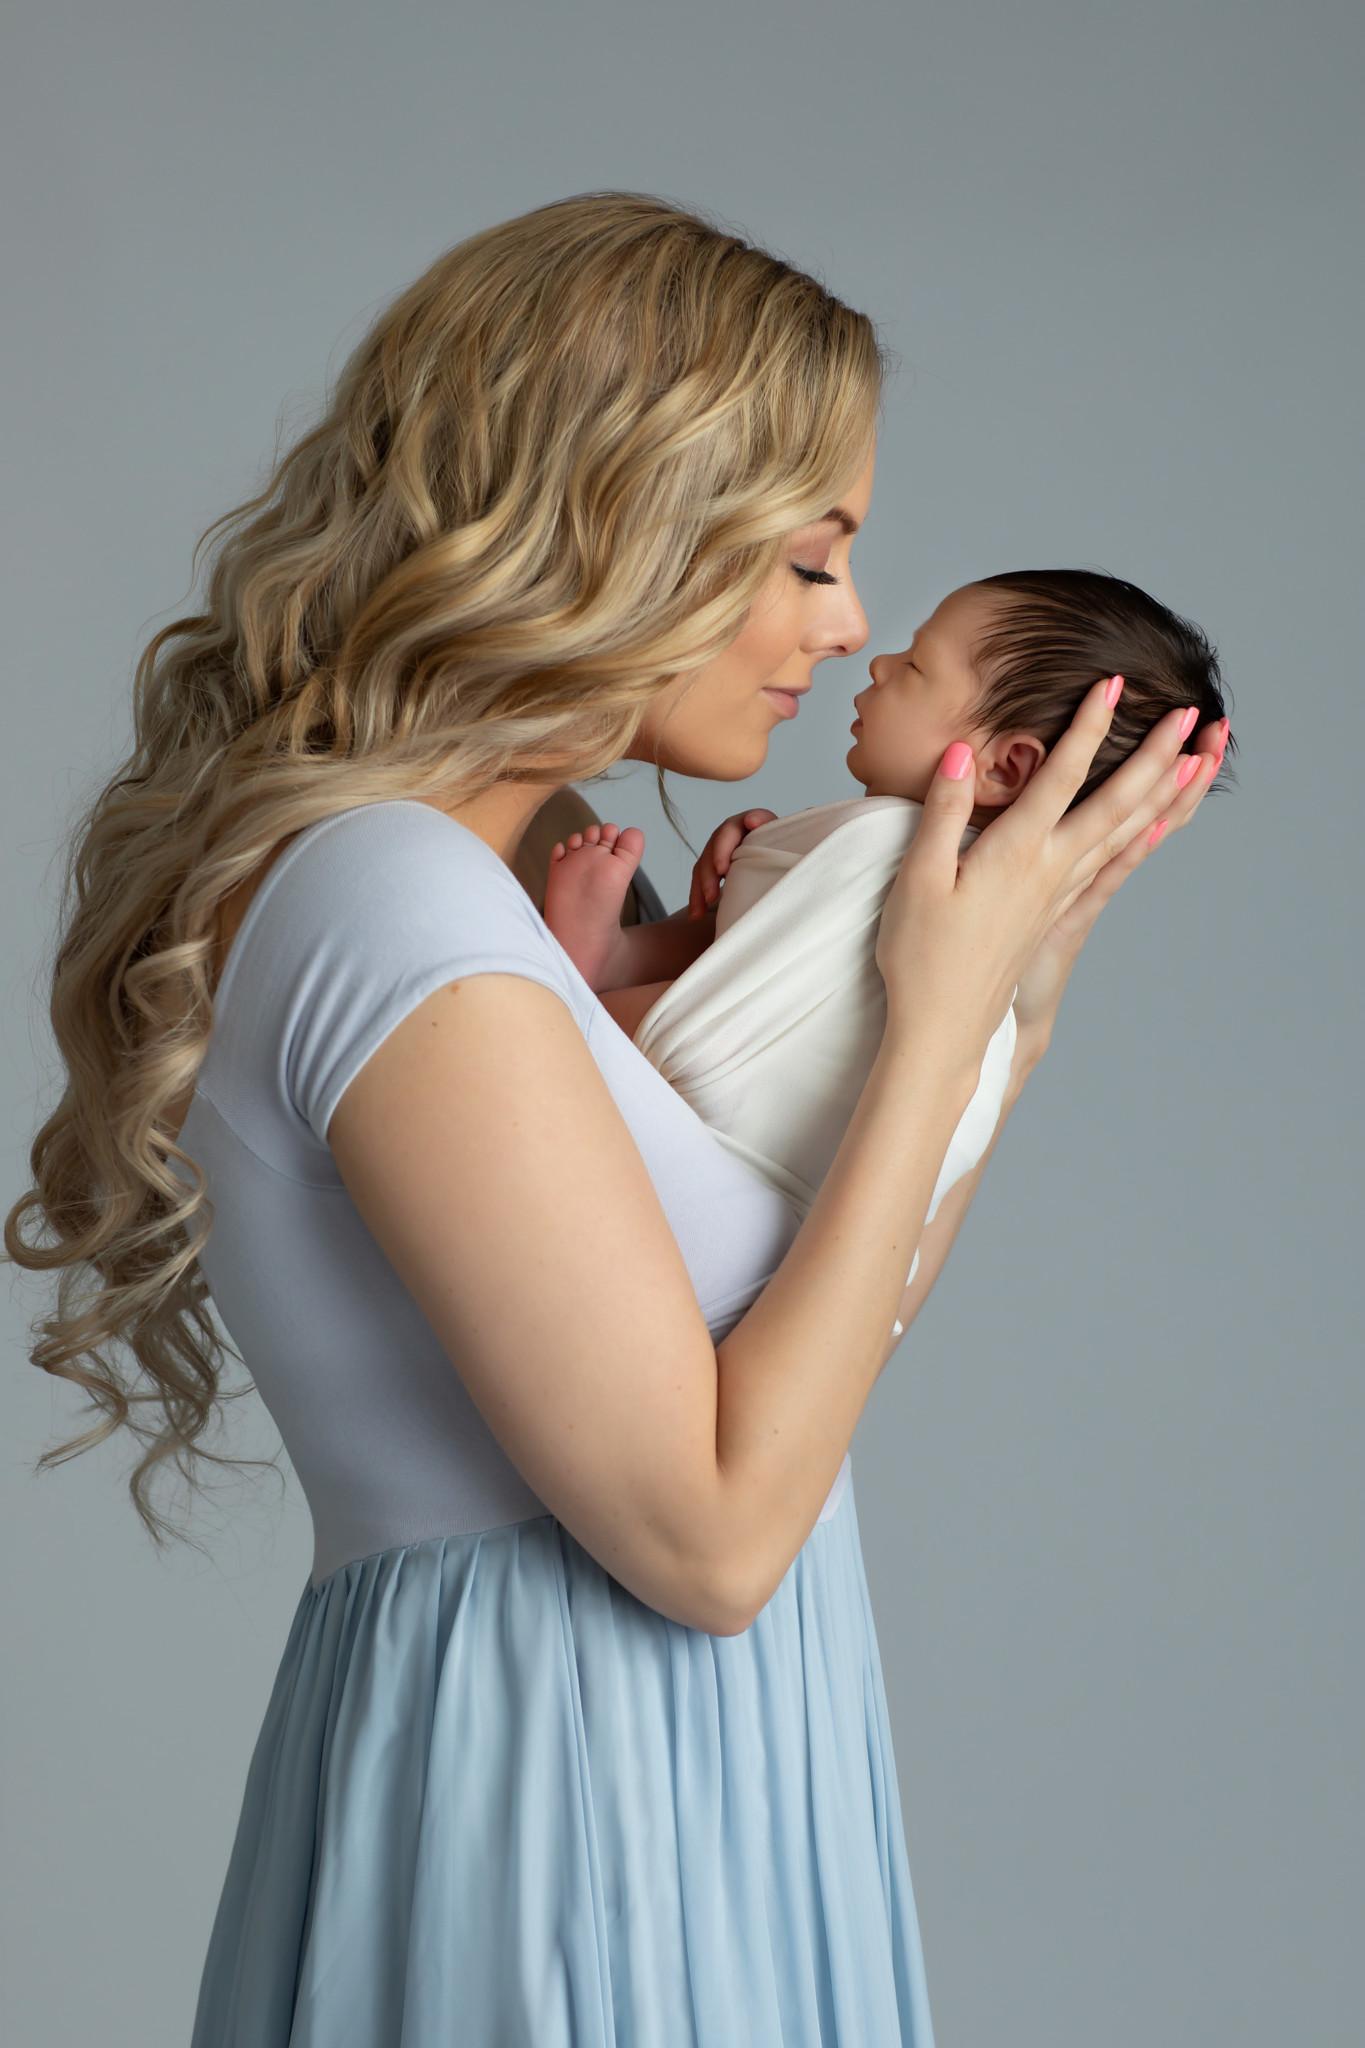 How to Prepare for Your Newborn Session